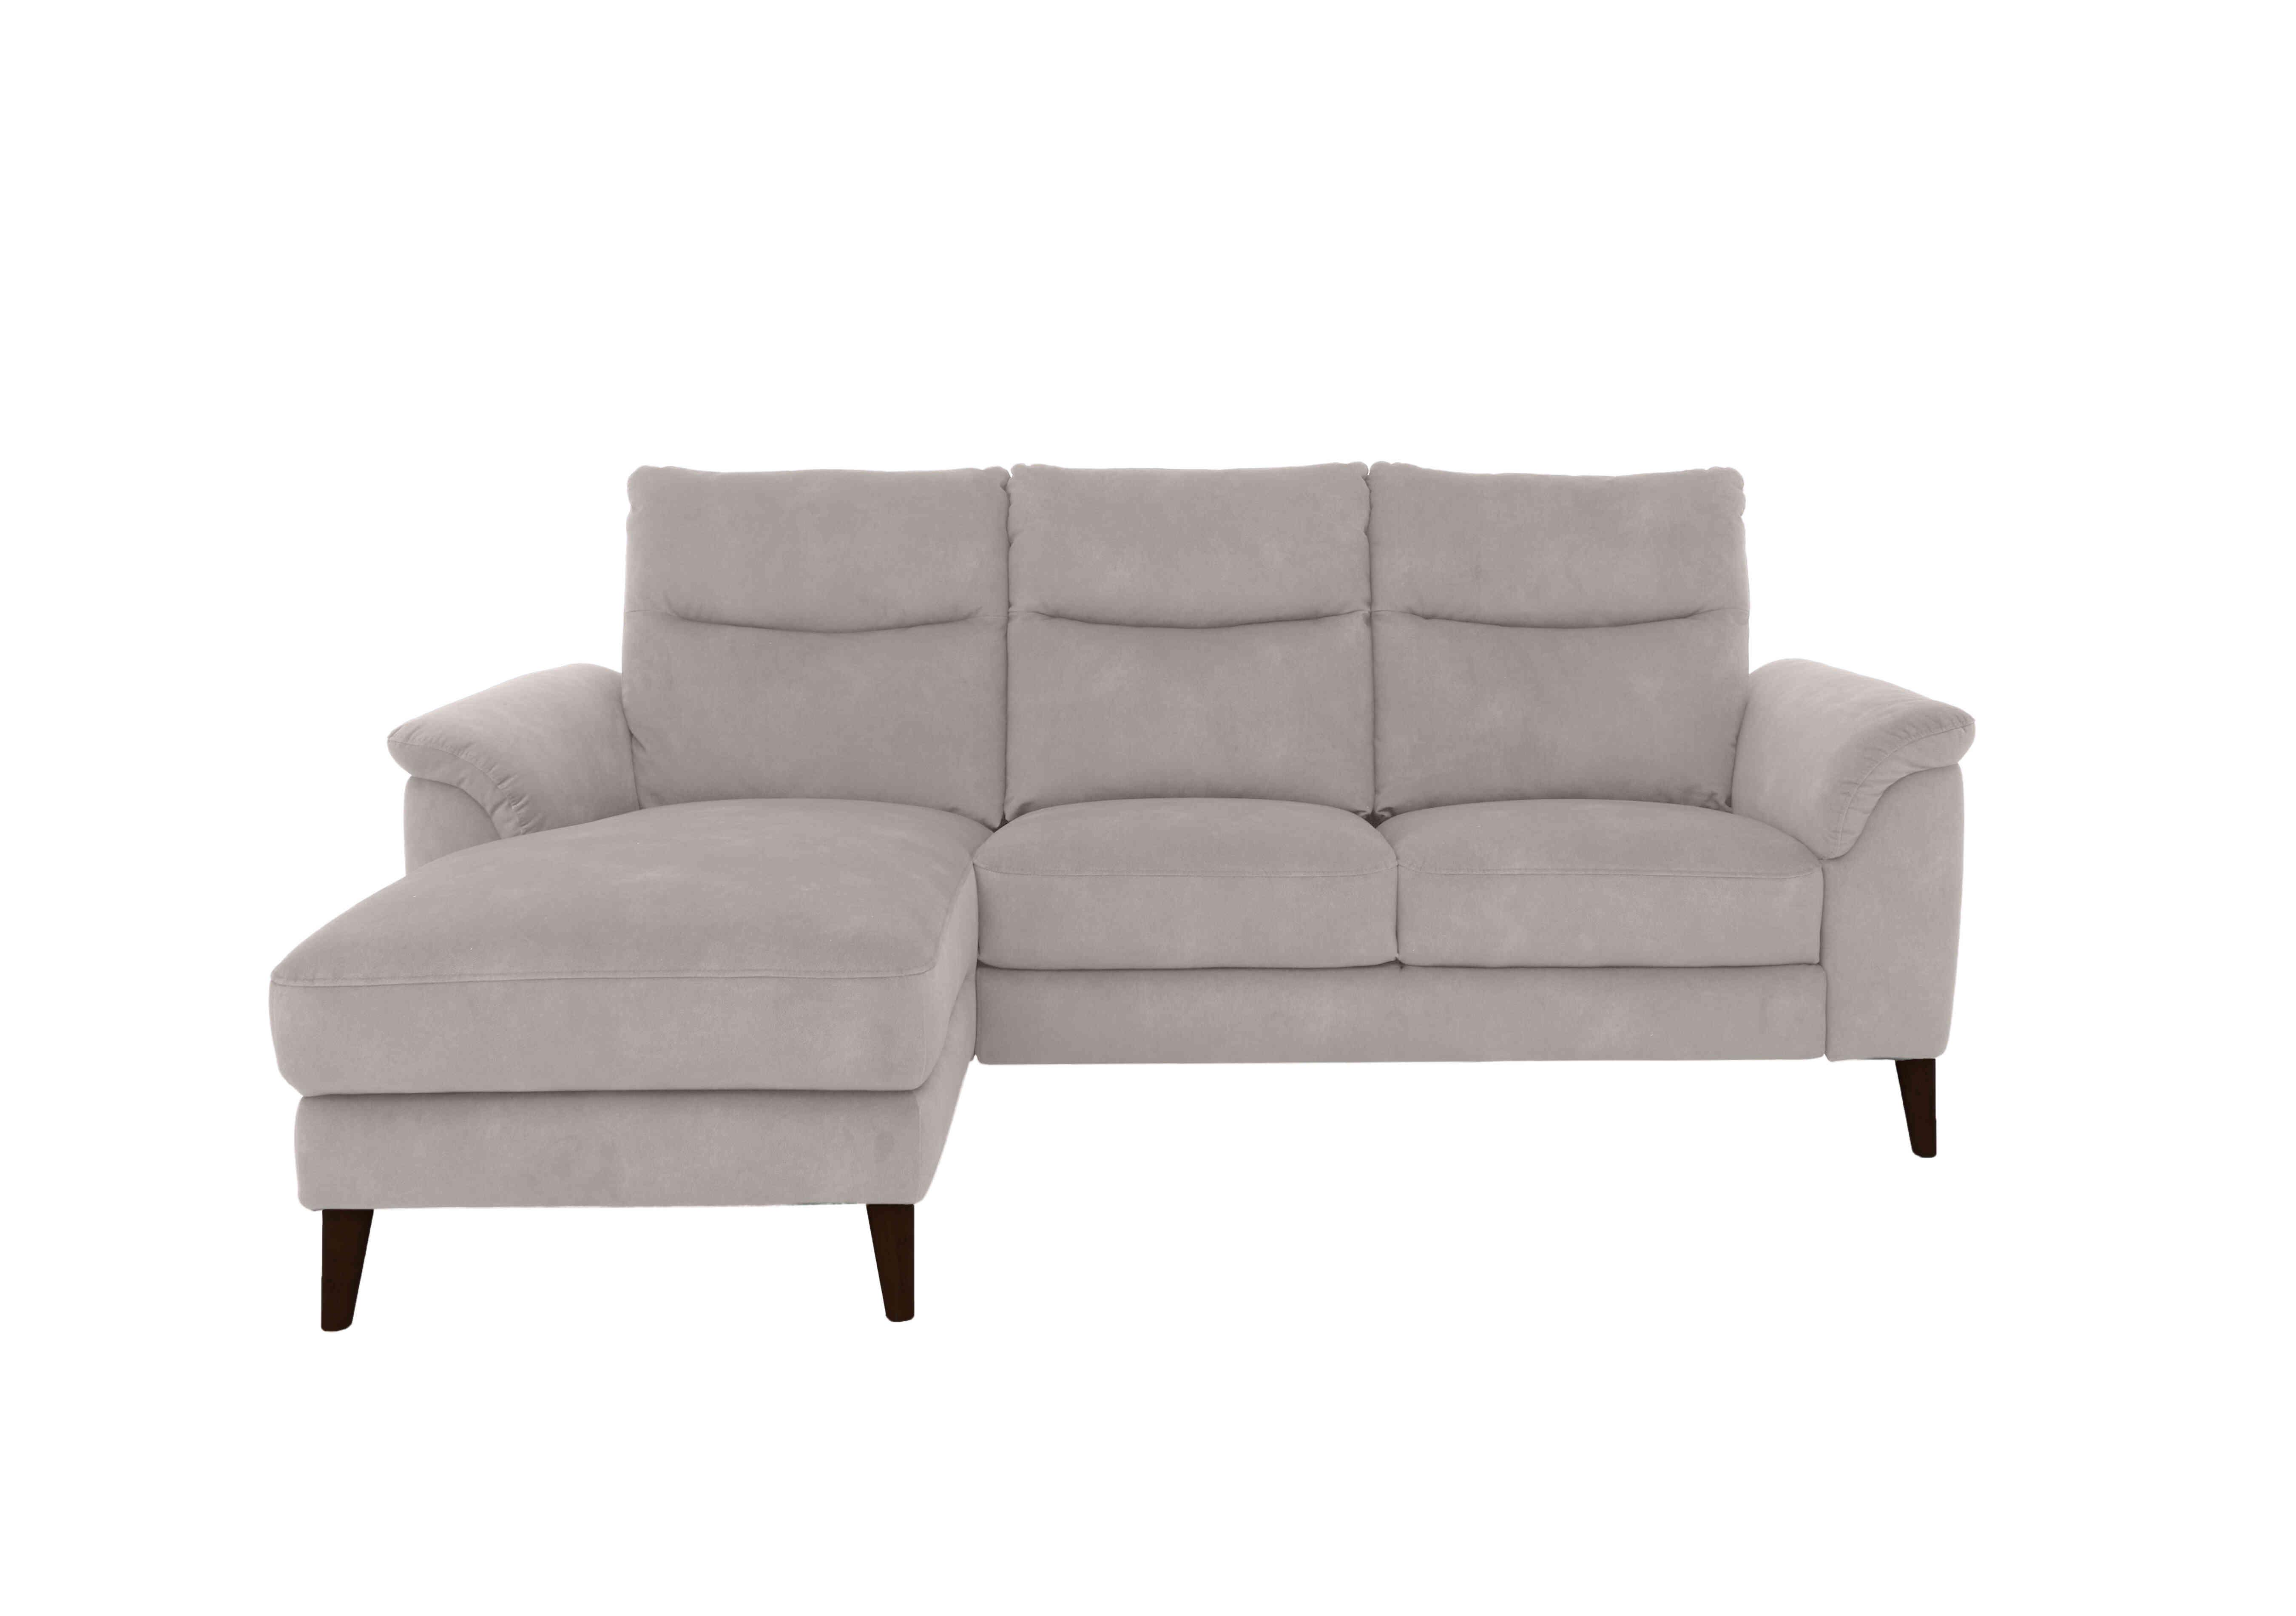 Morgan 3 Seater Fabric Sofa with Chaise End in Stone Dexter 02 43502 on Furniture Village